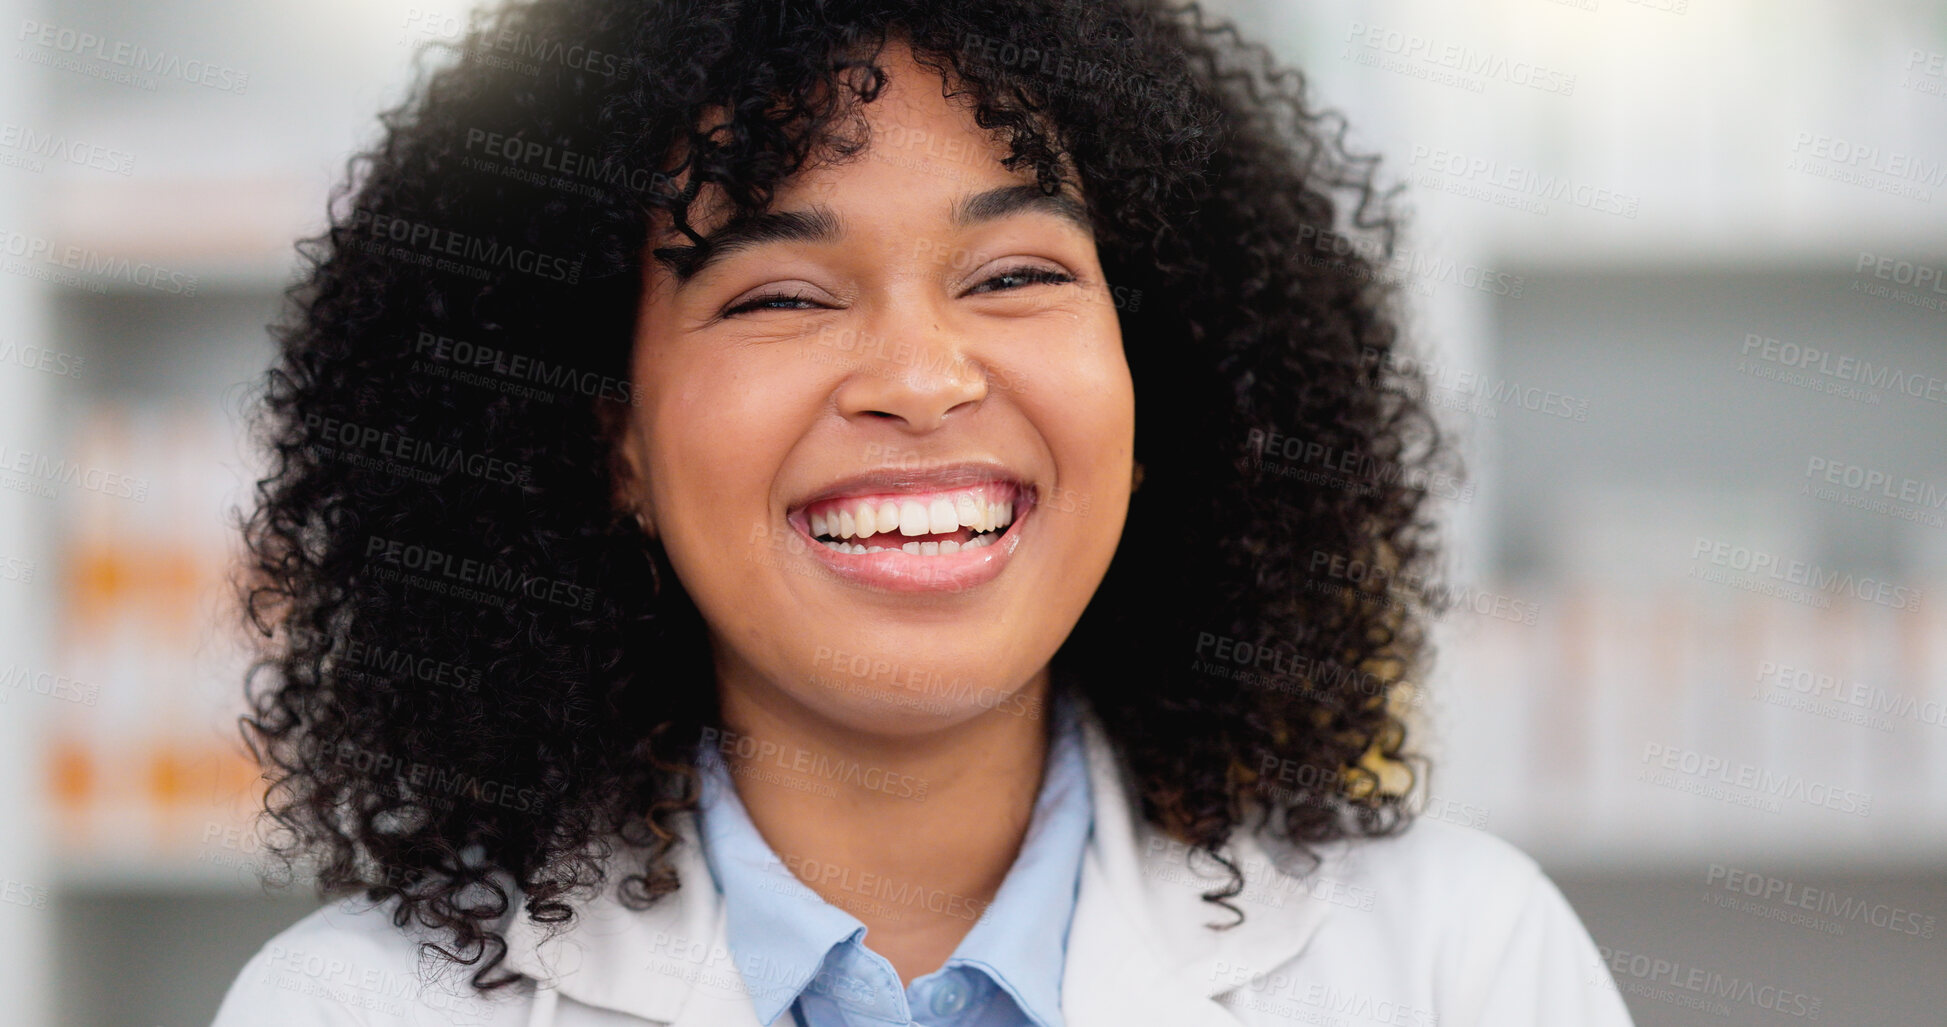 Buy stock photo Closeup portrait of pharmacist face against a bright background with copy space. Professional healthcare worker excited to help, diagnose and treat sick patients at a drugstore or clinic dispensary